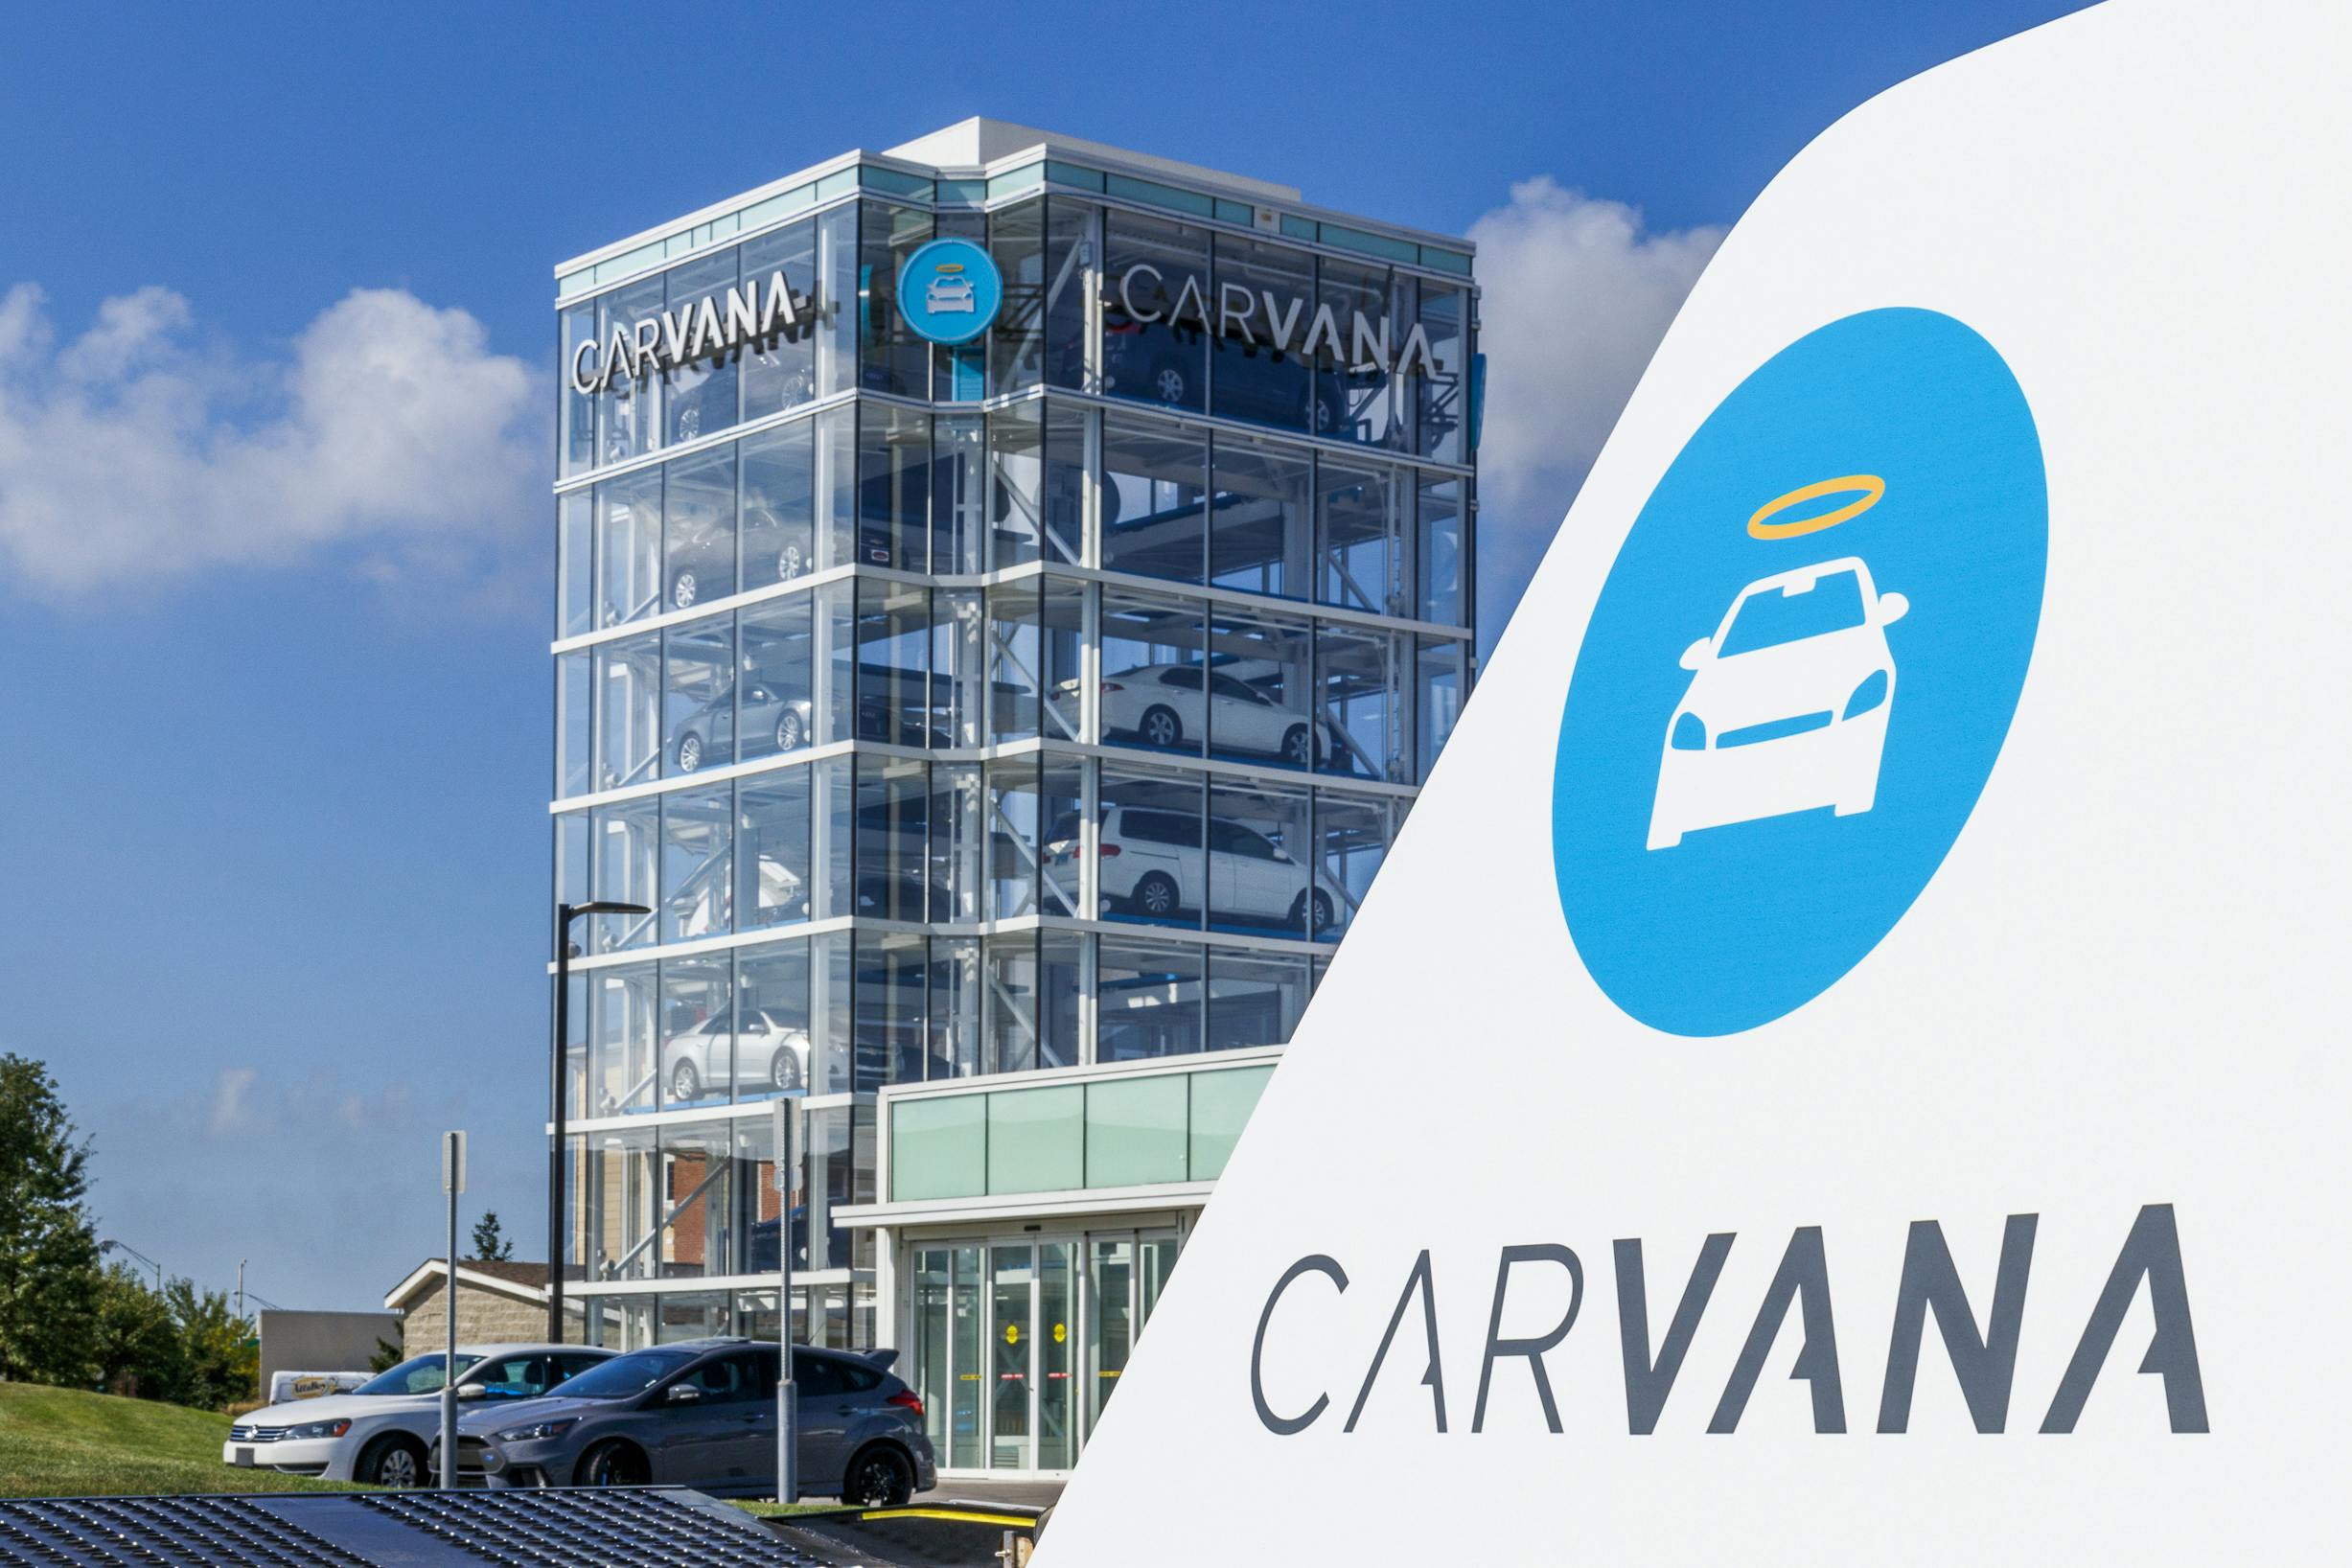 A Carvana sign with the Carvana building in the background with vehicles parked in front of it